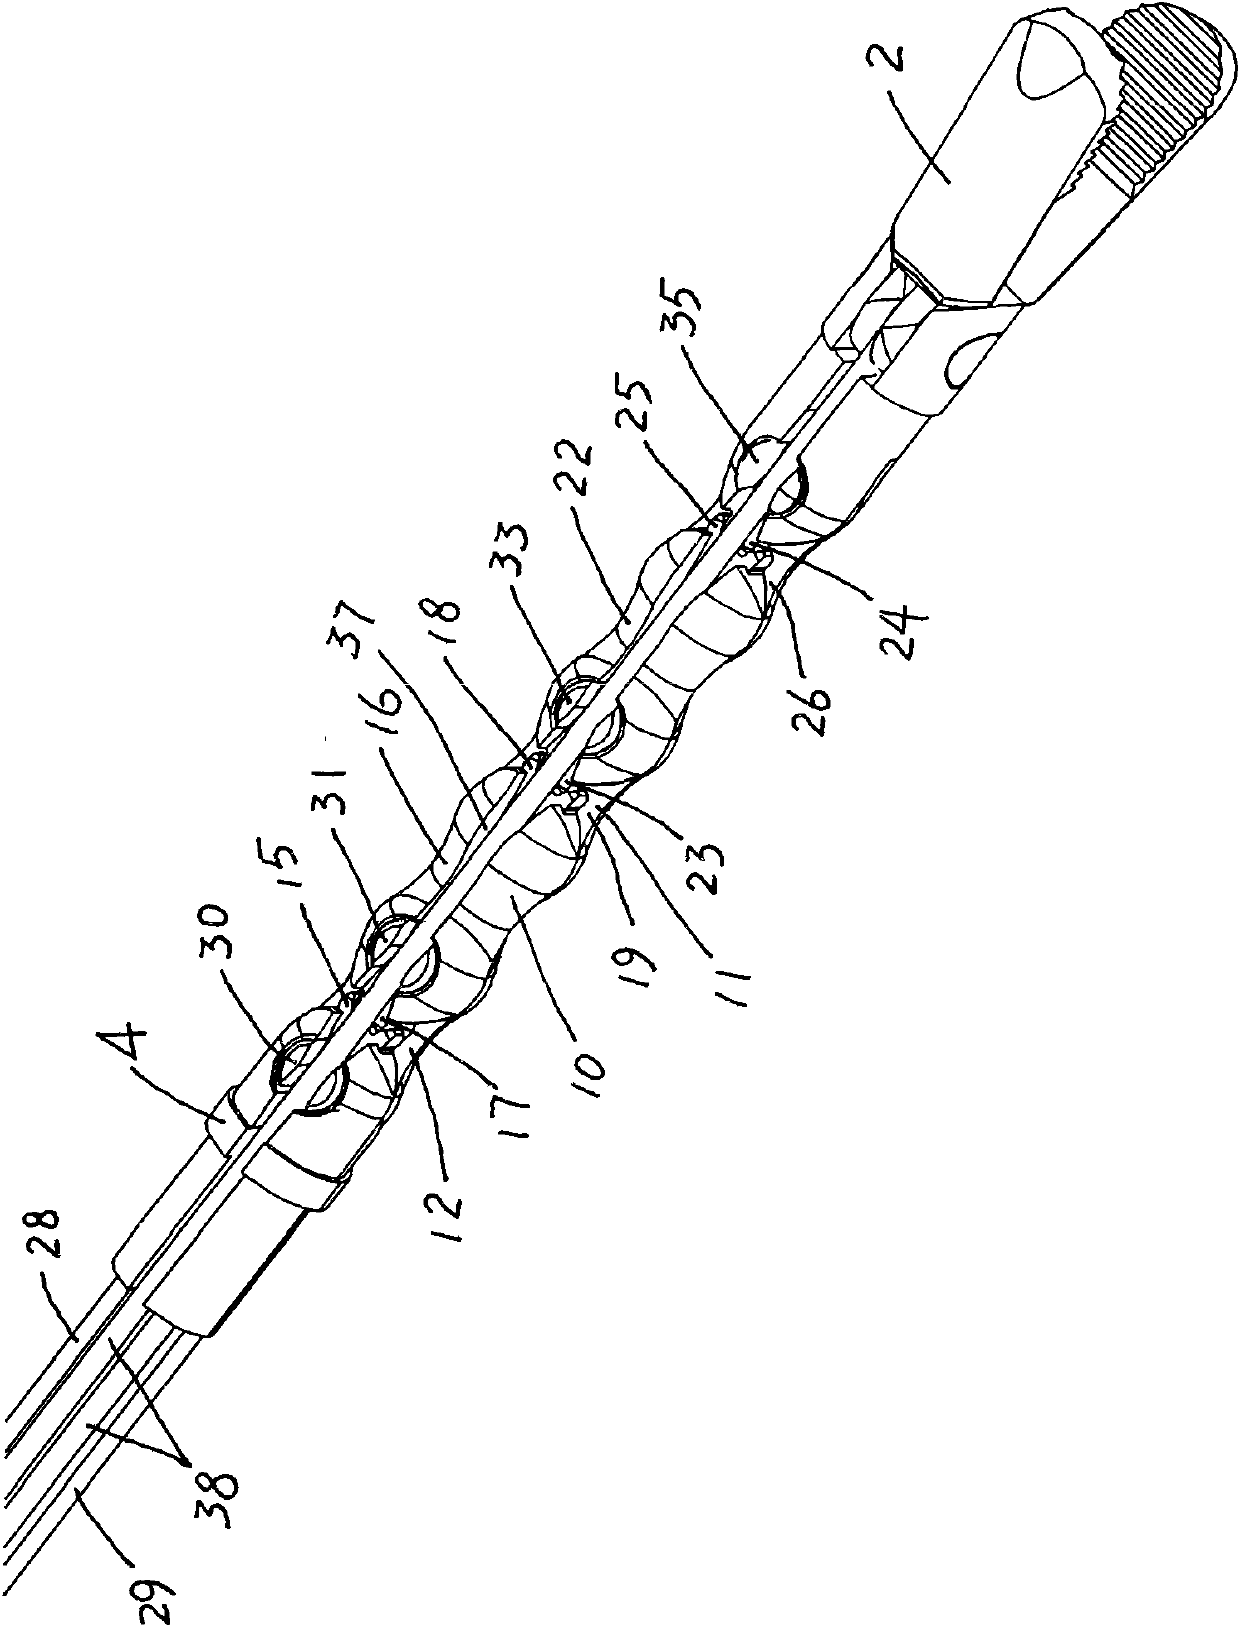 Minimally invasive surgical apparatus provided with chain joints